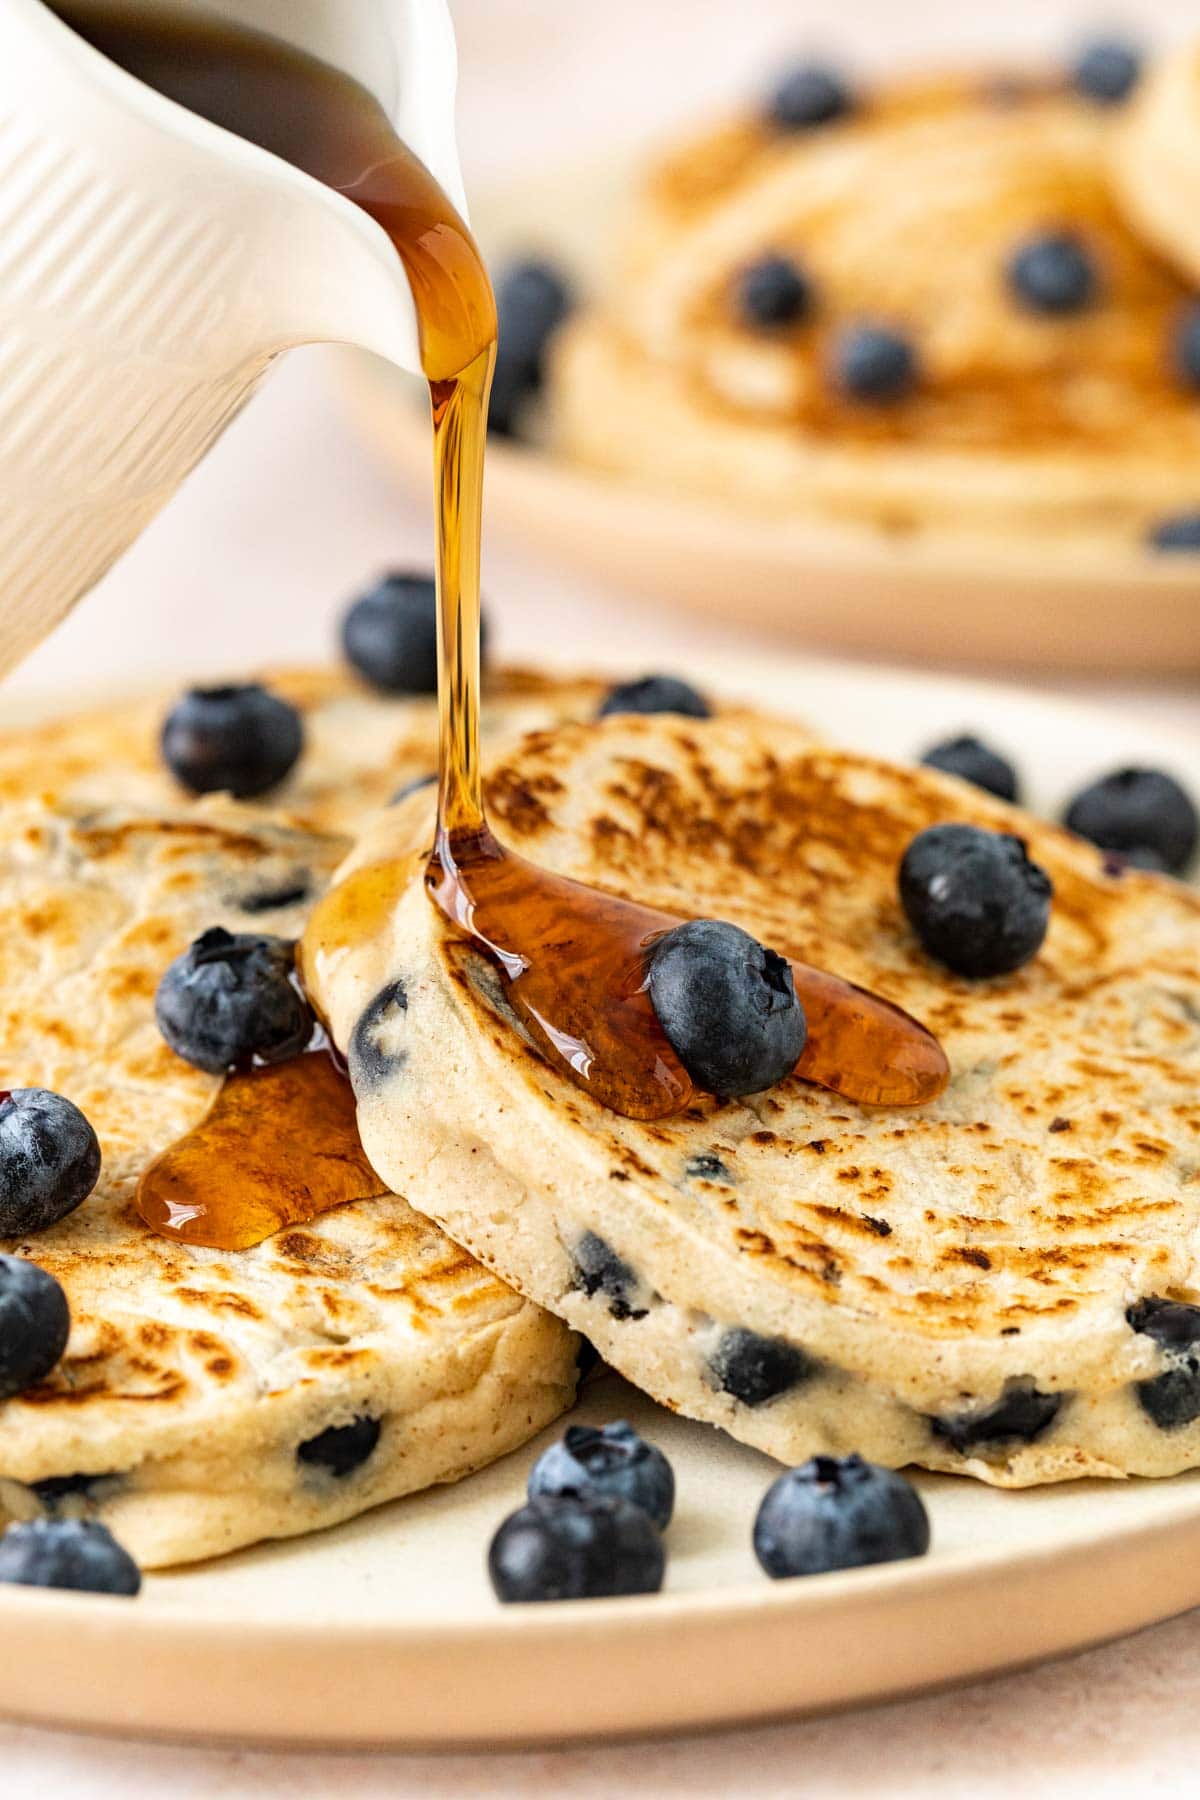 Blueberry Pancakes on plate with syrup